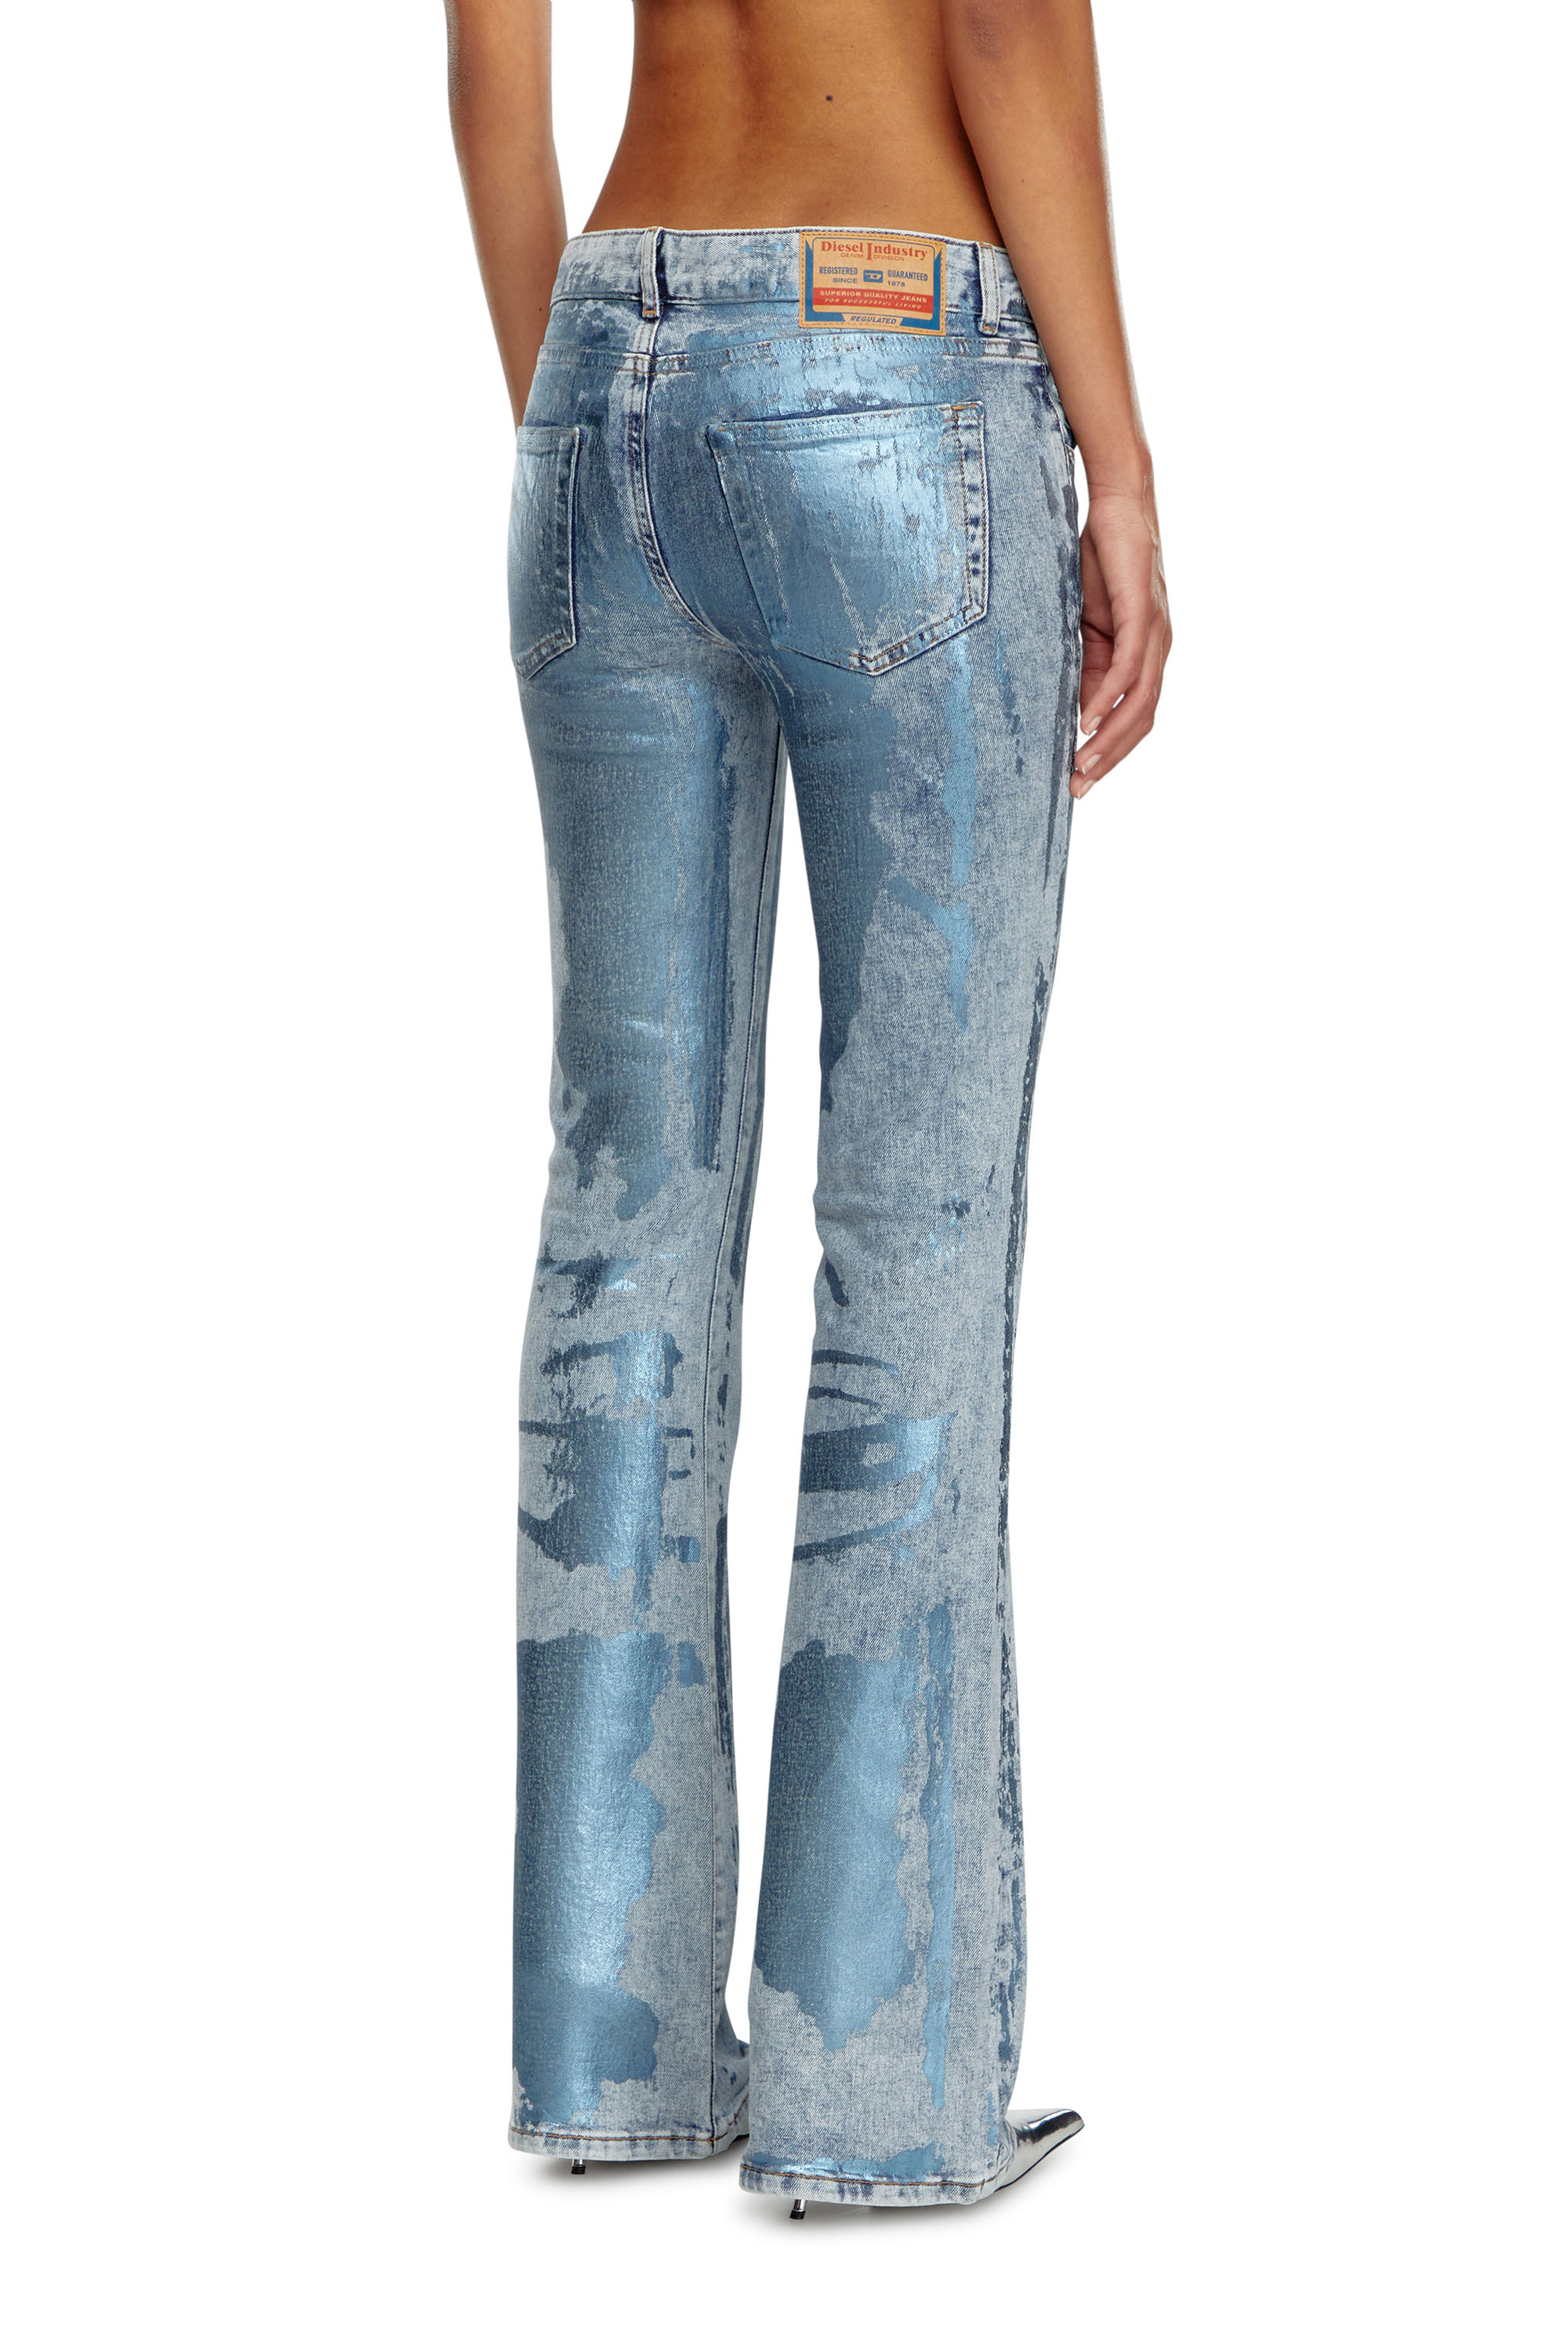 Diesel - Bootcut and Flare Jeans 1969 D-Ebbey 0AJEU, Mujer Bootcut y Flare Jeans - 1969 D-Ebbey in Azul marino - Image 4